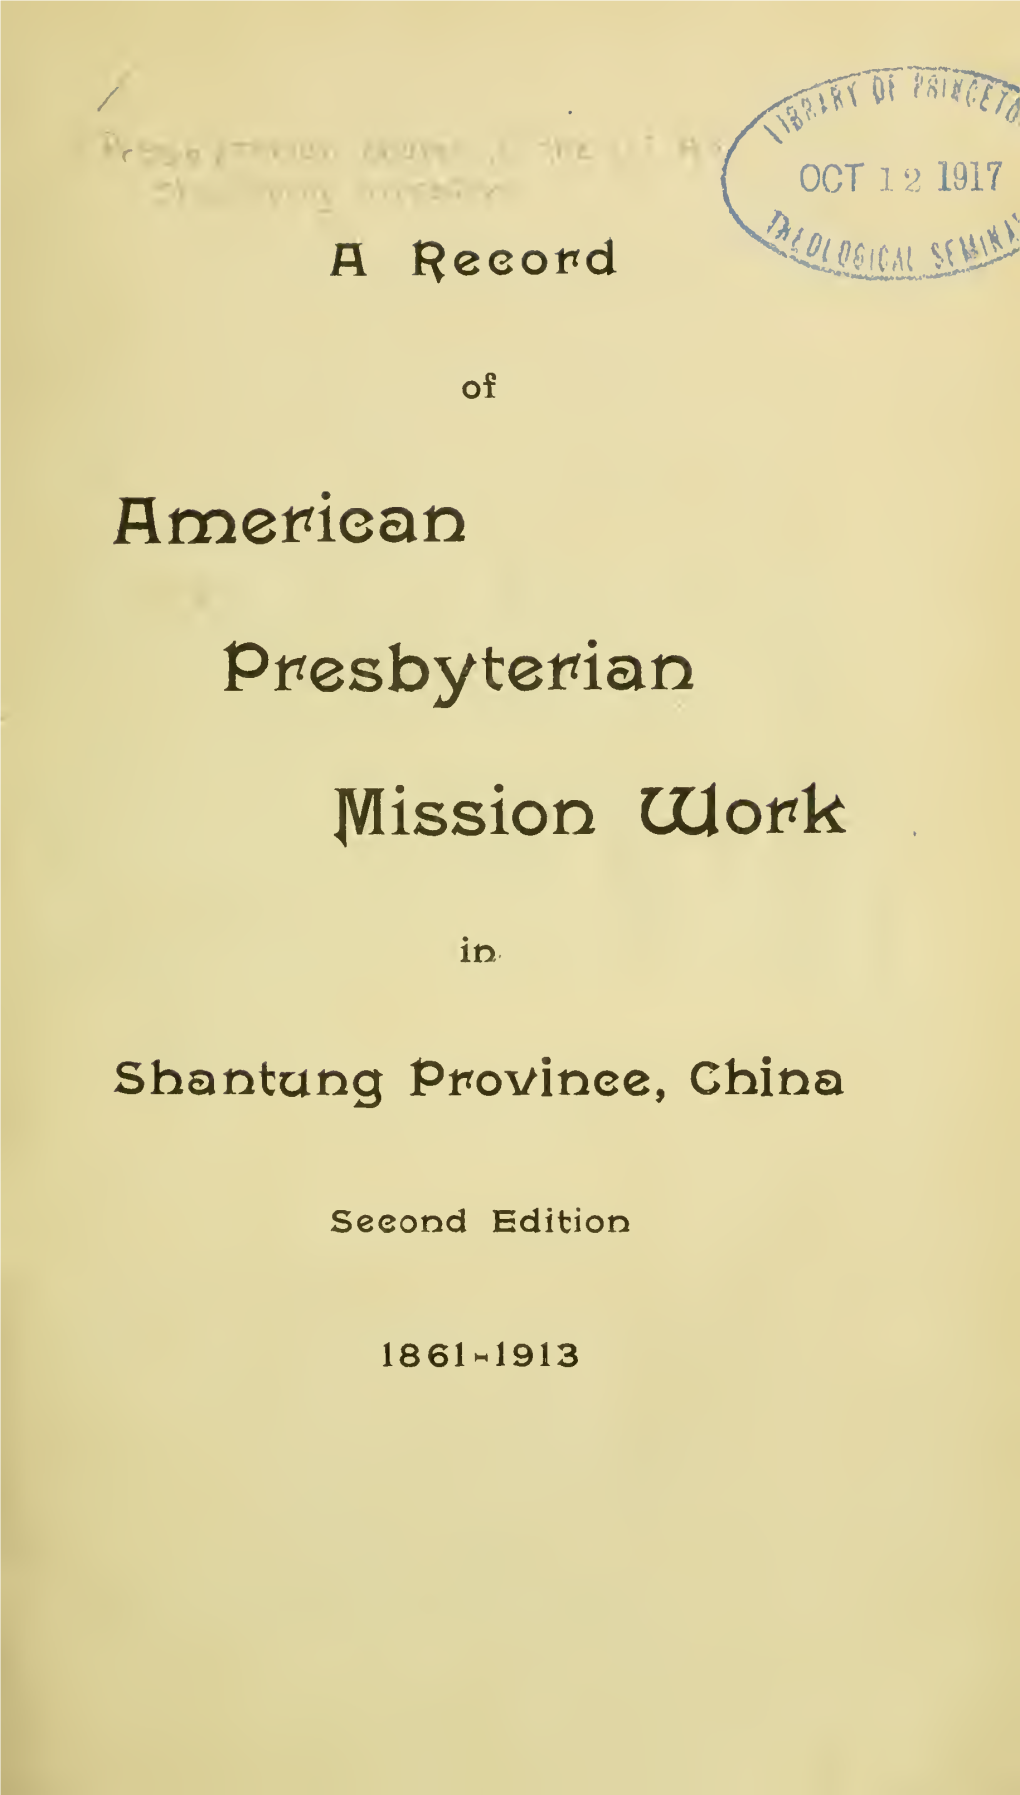 A Record of American Presbyterian Mission Work in Shantung Province